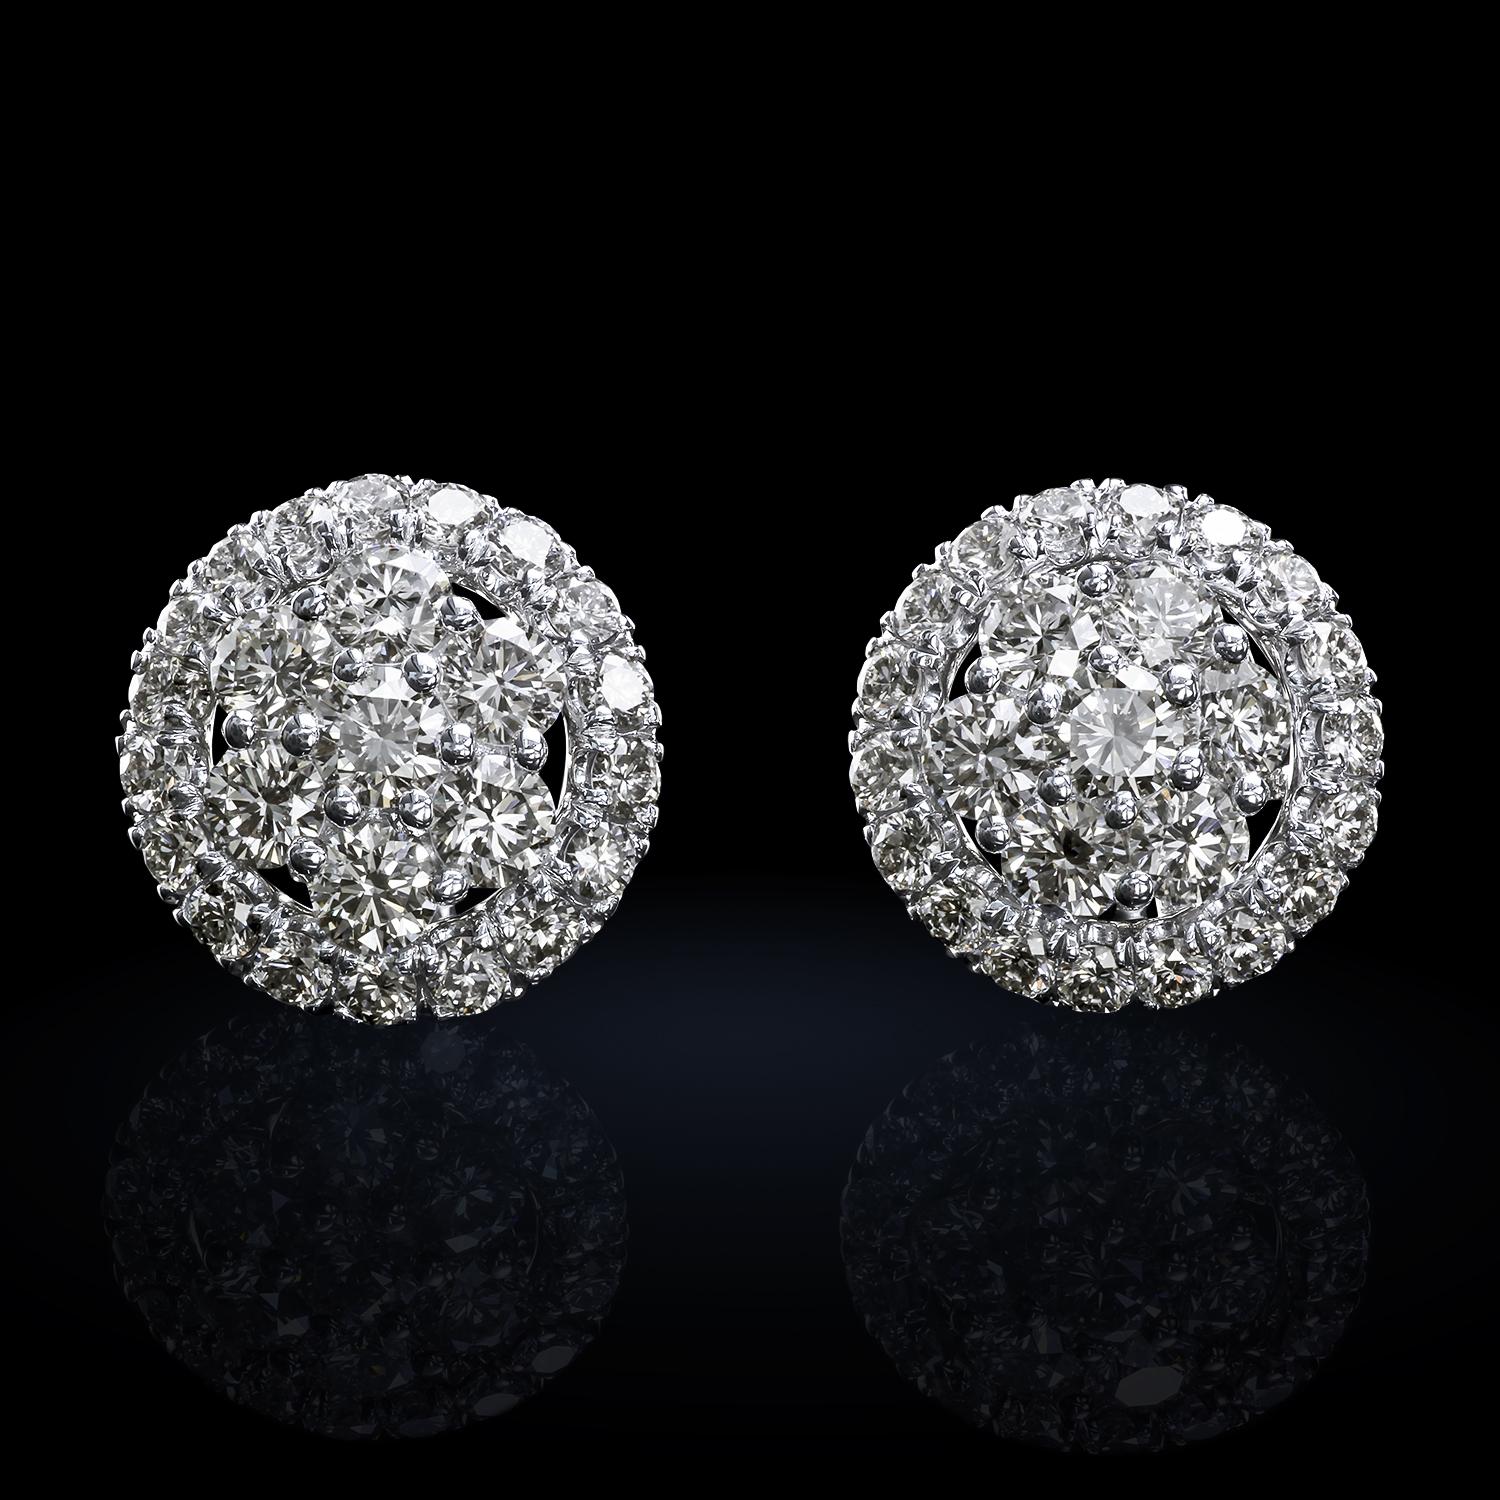 Everyone needs a pair of diamond stud earrings, but you deserve so much more. Leon Megé has made an incredibly beautiful, custom pair with shimmering, brilliant round cut diamonds. 
Perfect for all occasions, when you don't want a dangling set, but